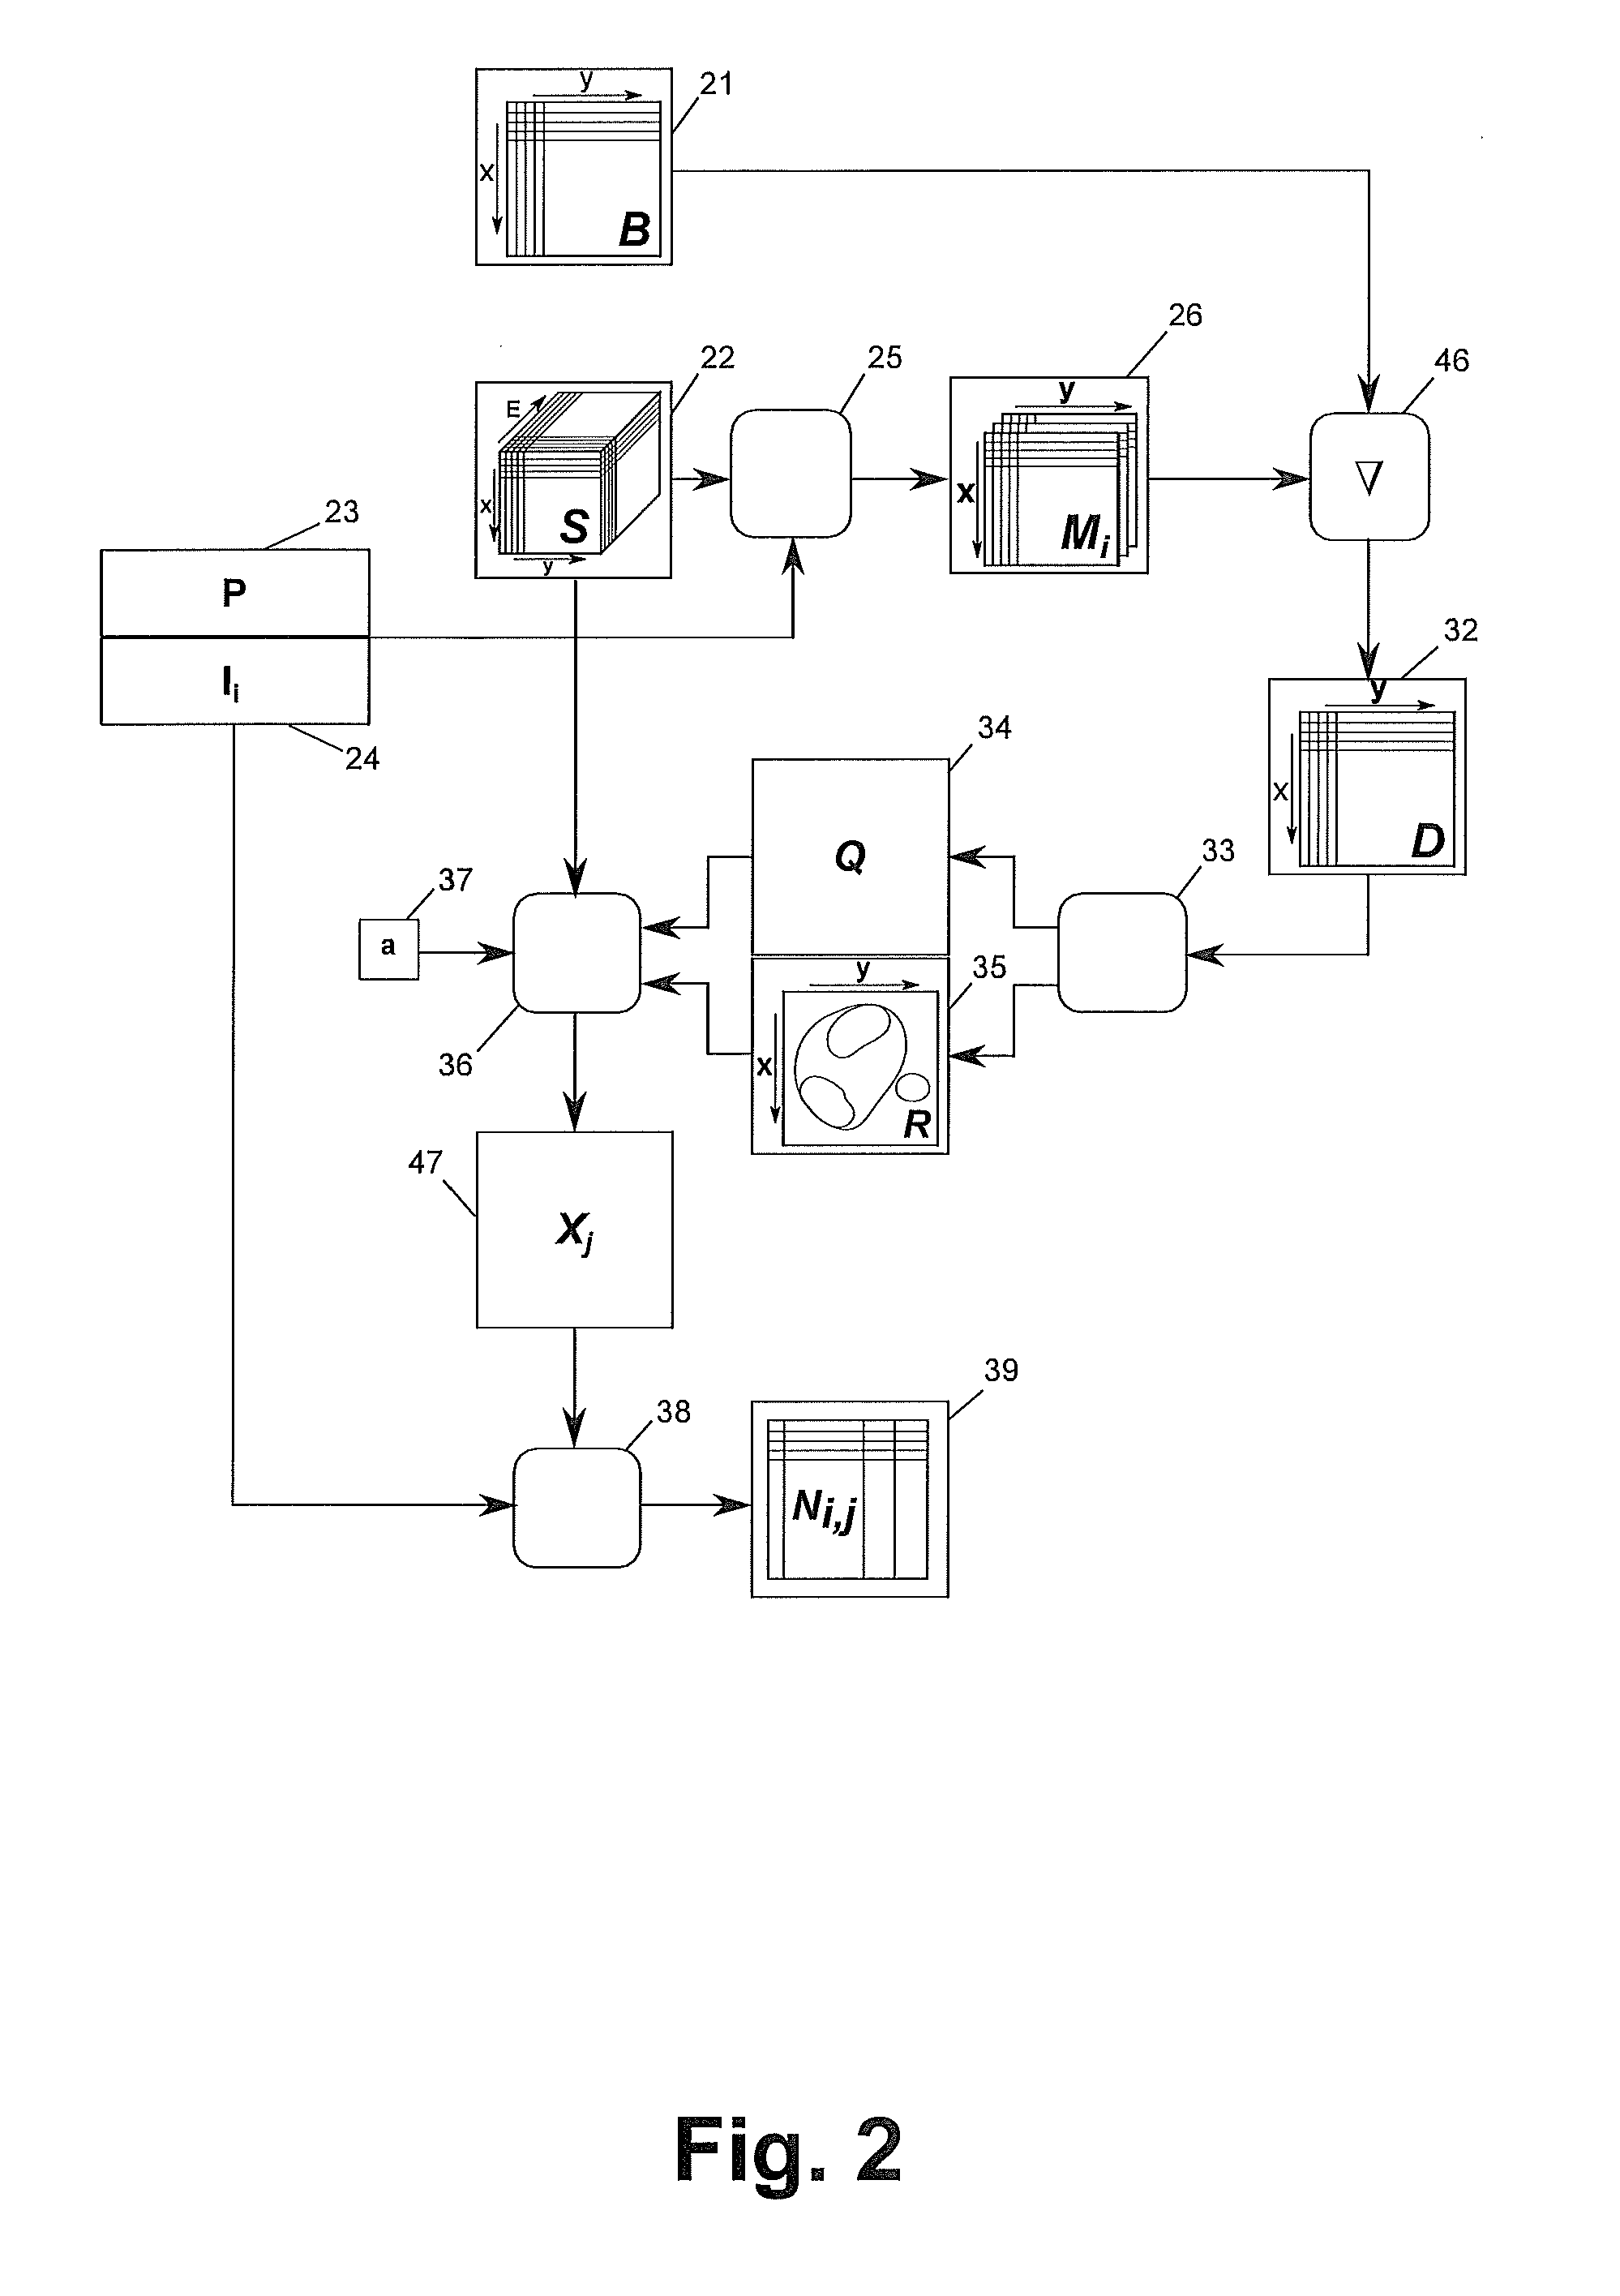 Method and apparatus for material analysis by a focused electron beam using characteristic x-rays and back-scattered electrons